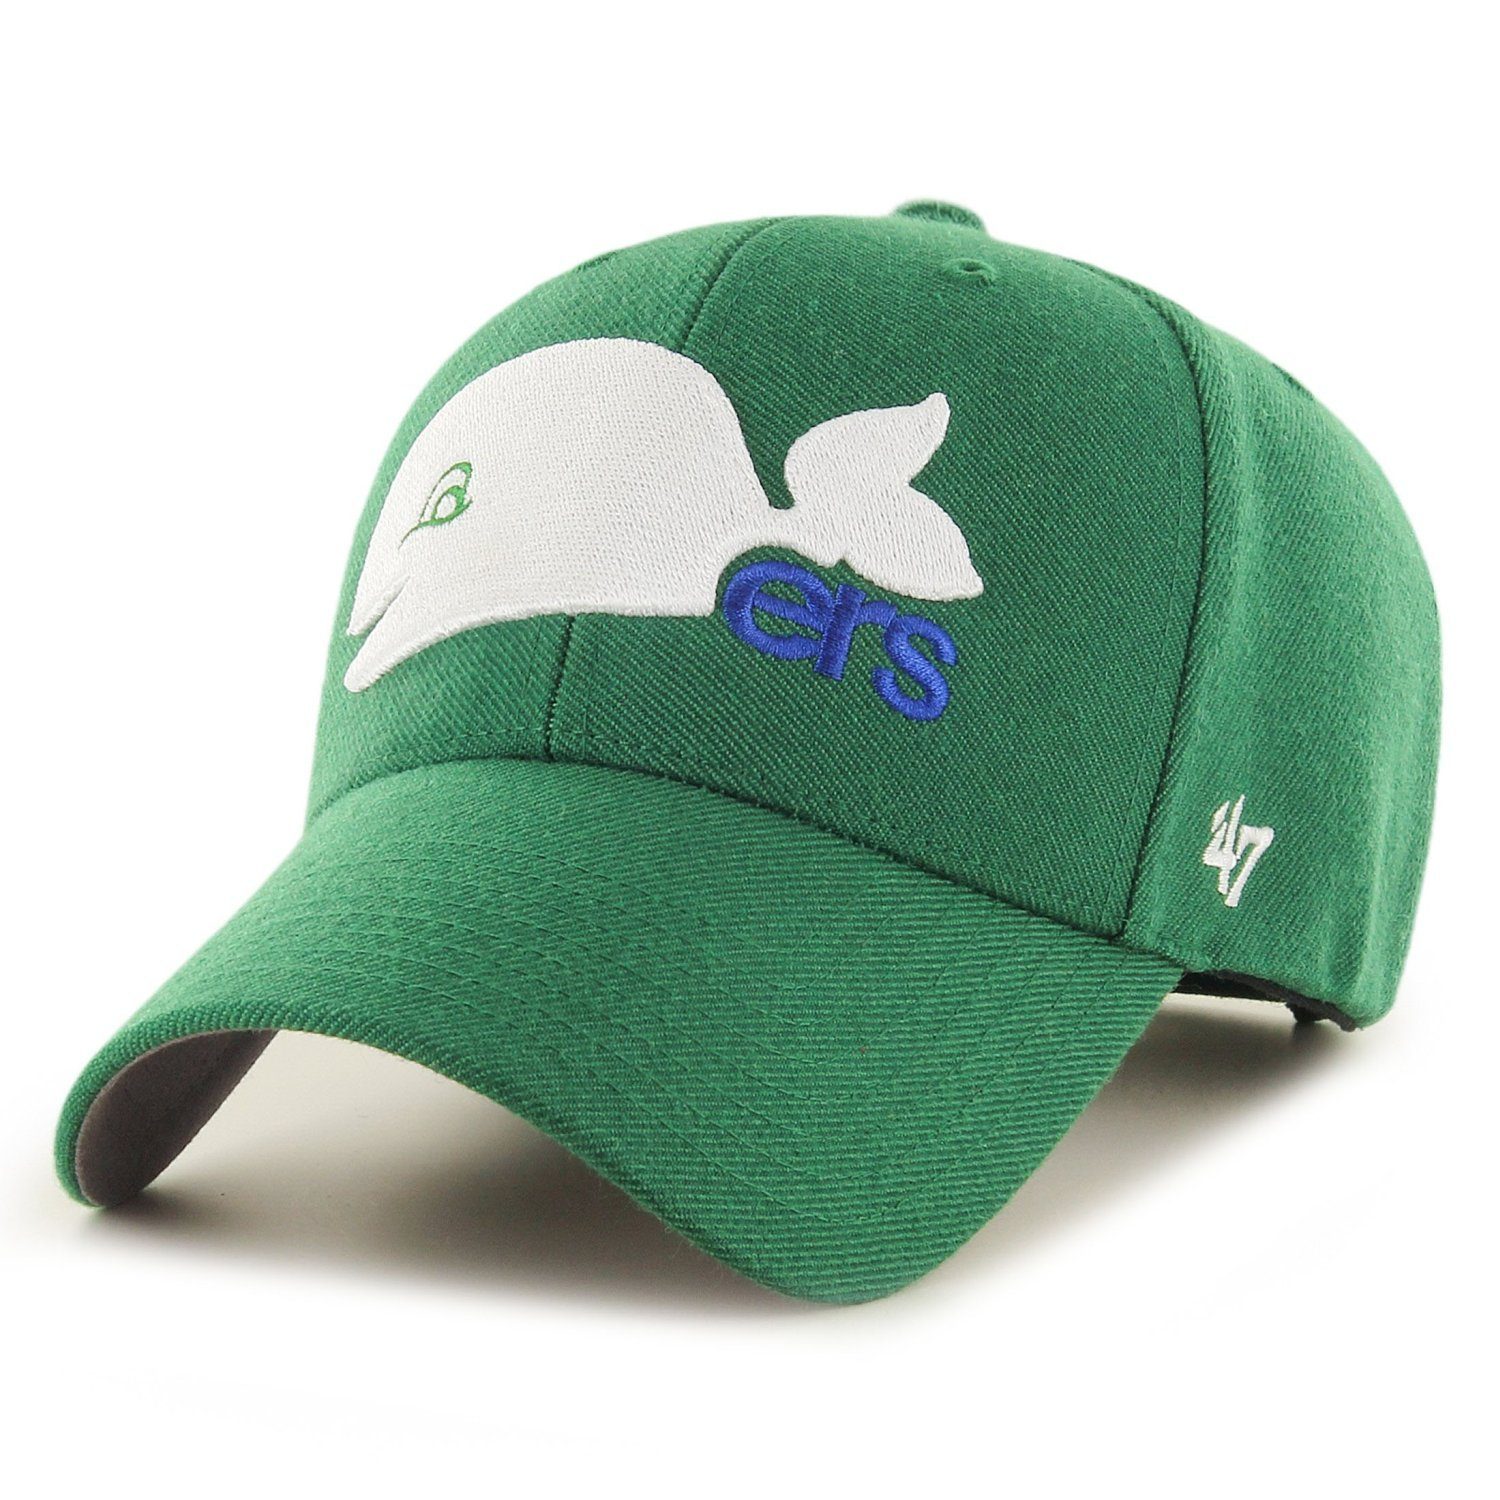 '47 Brand Trucker Cap Relaxed Fit NHL Hartford Whalers